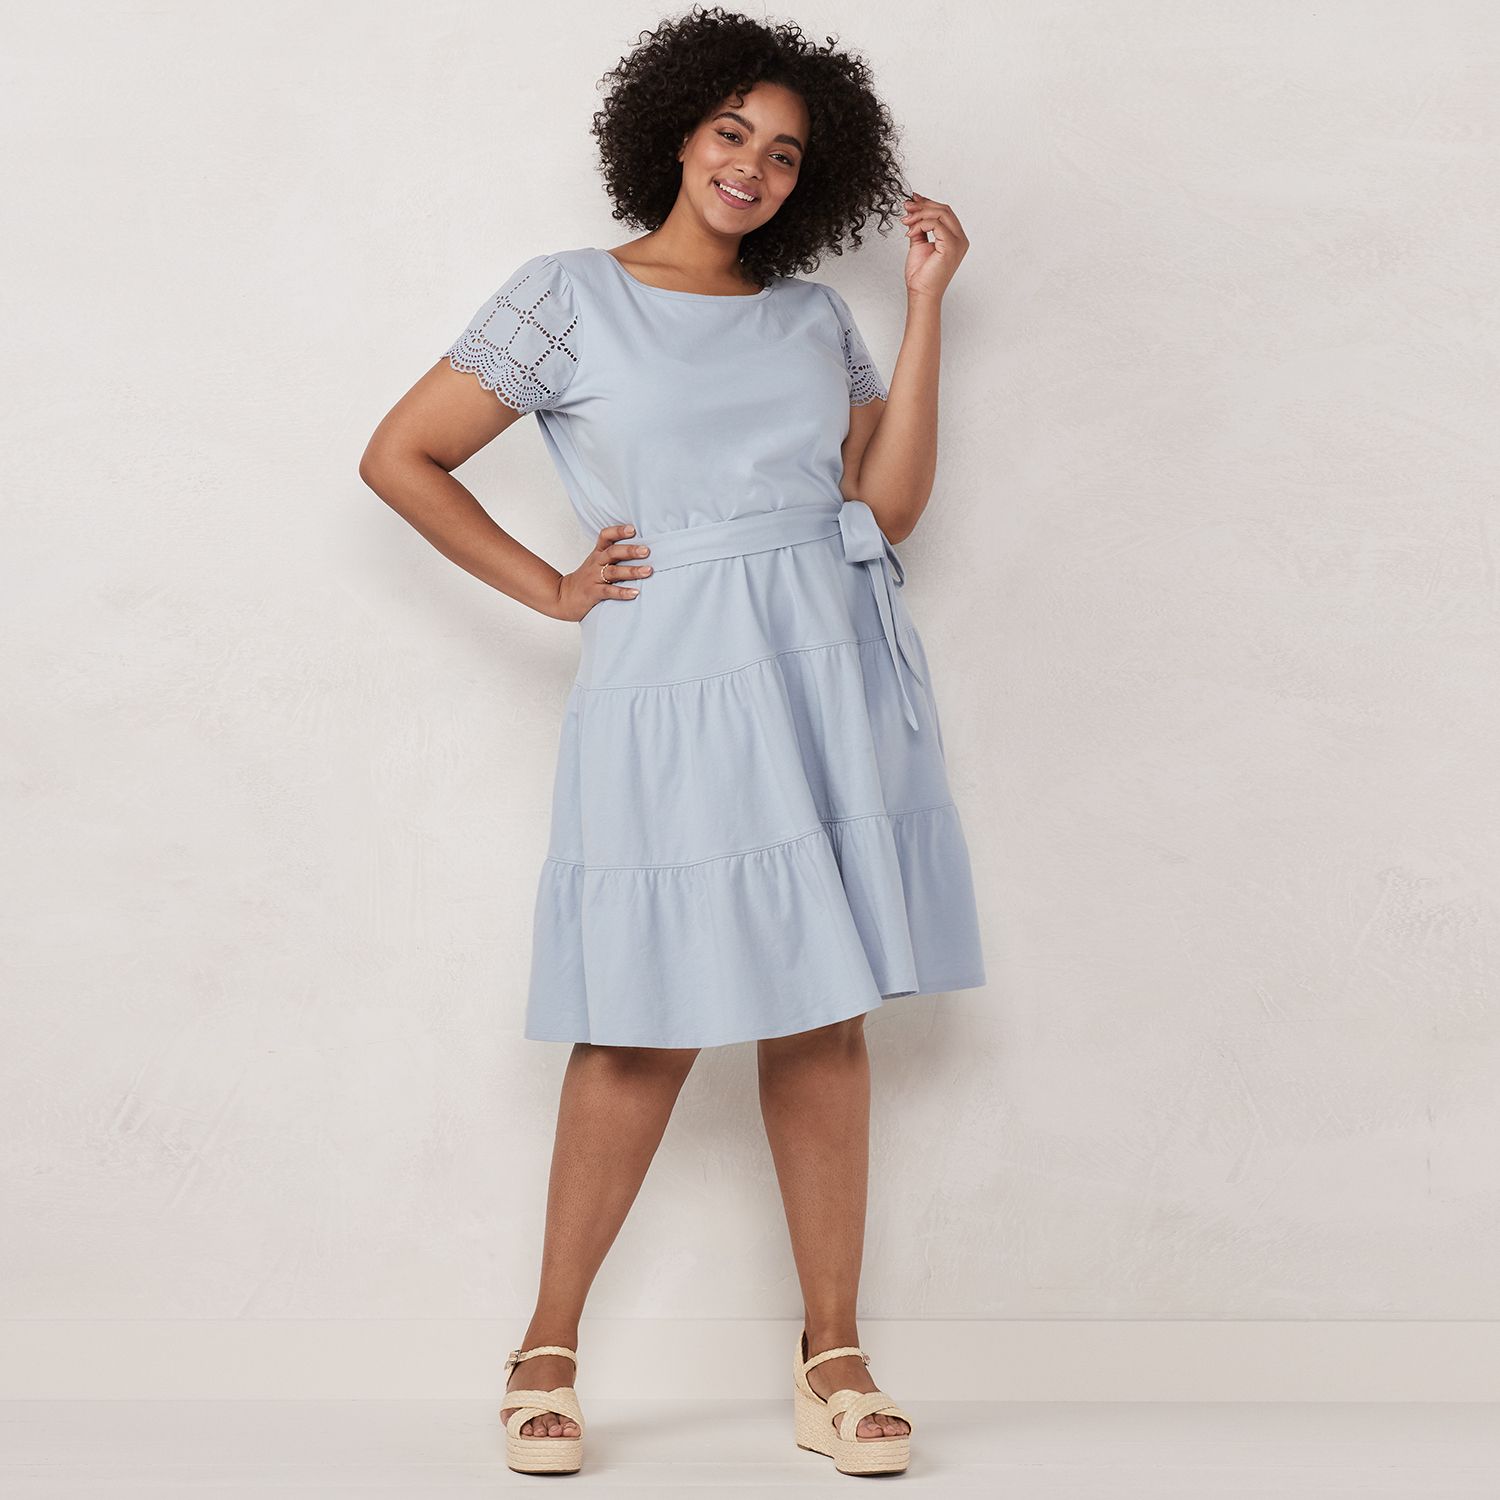 kohl's fit and flare dresses